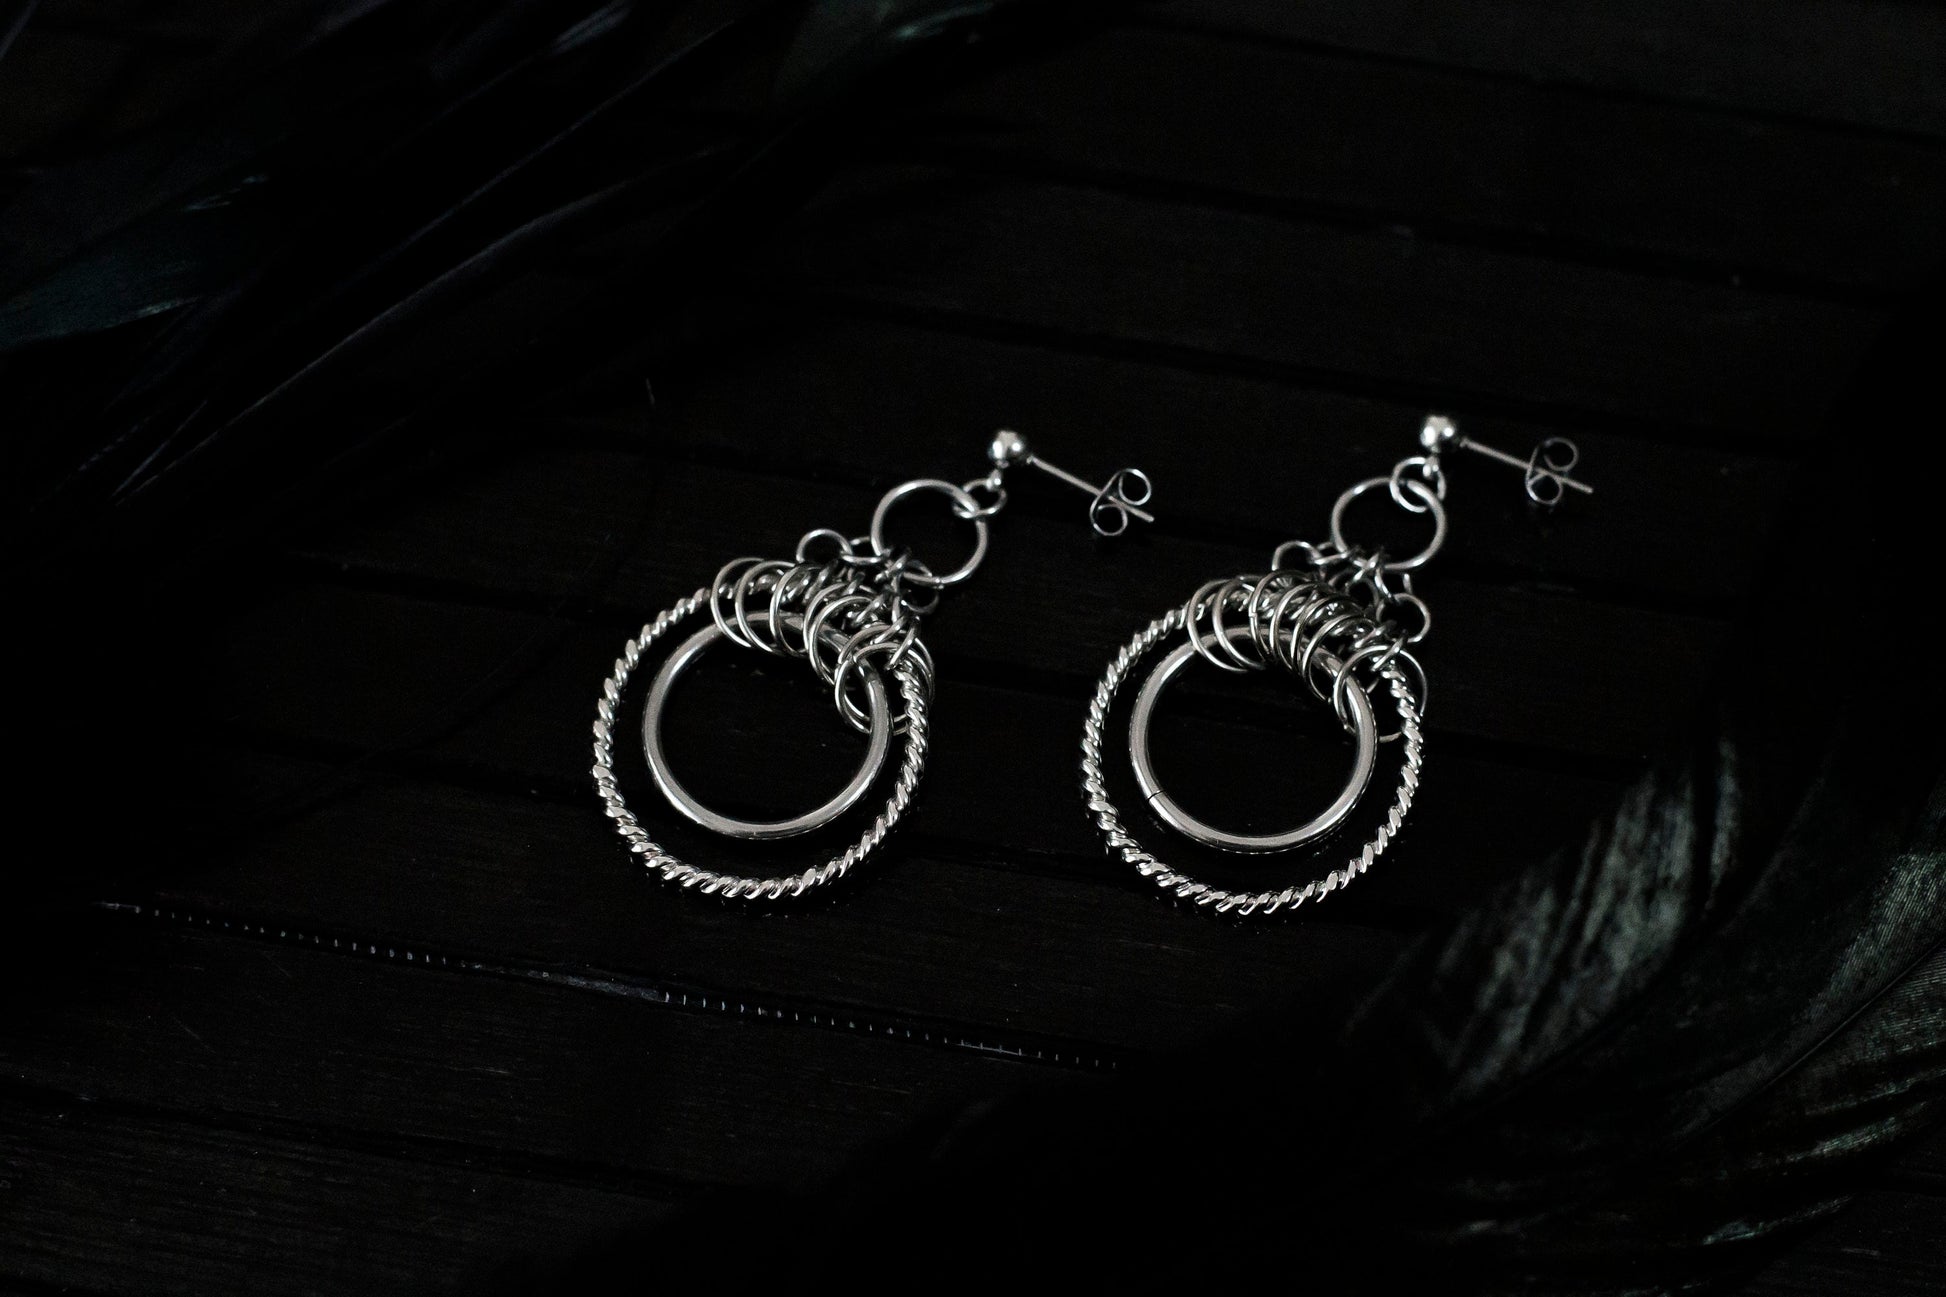 The image displays a pair of double hoop earrings with a sophisticated design. The earrings feature two concentric circles; the inner hoop is smooth and polished, while the outer hoop has a twisted rope-like texture, enhancing its visual appeal. Above the hoops, there is a cluster of smaller rings adding complexity to the design. These earrings, likely from Myril Jewels, reflect a gothic-chic style that merges elegance with an edgy touch, making them suitable for various occasions